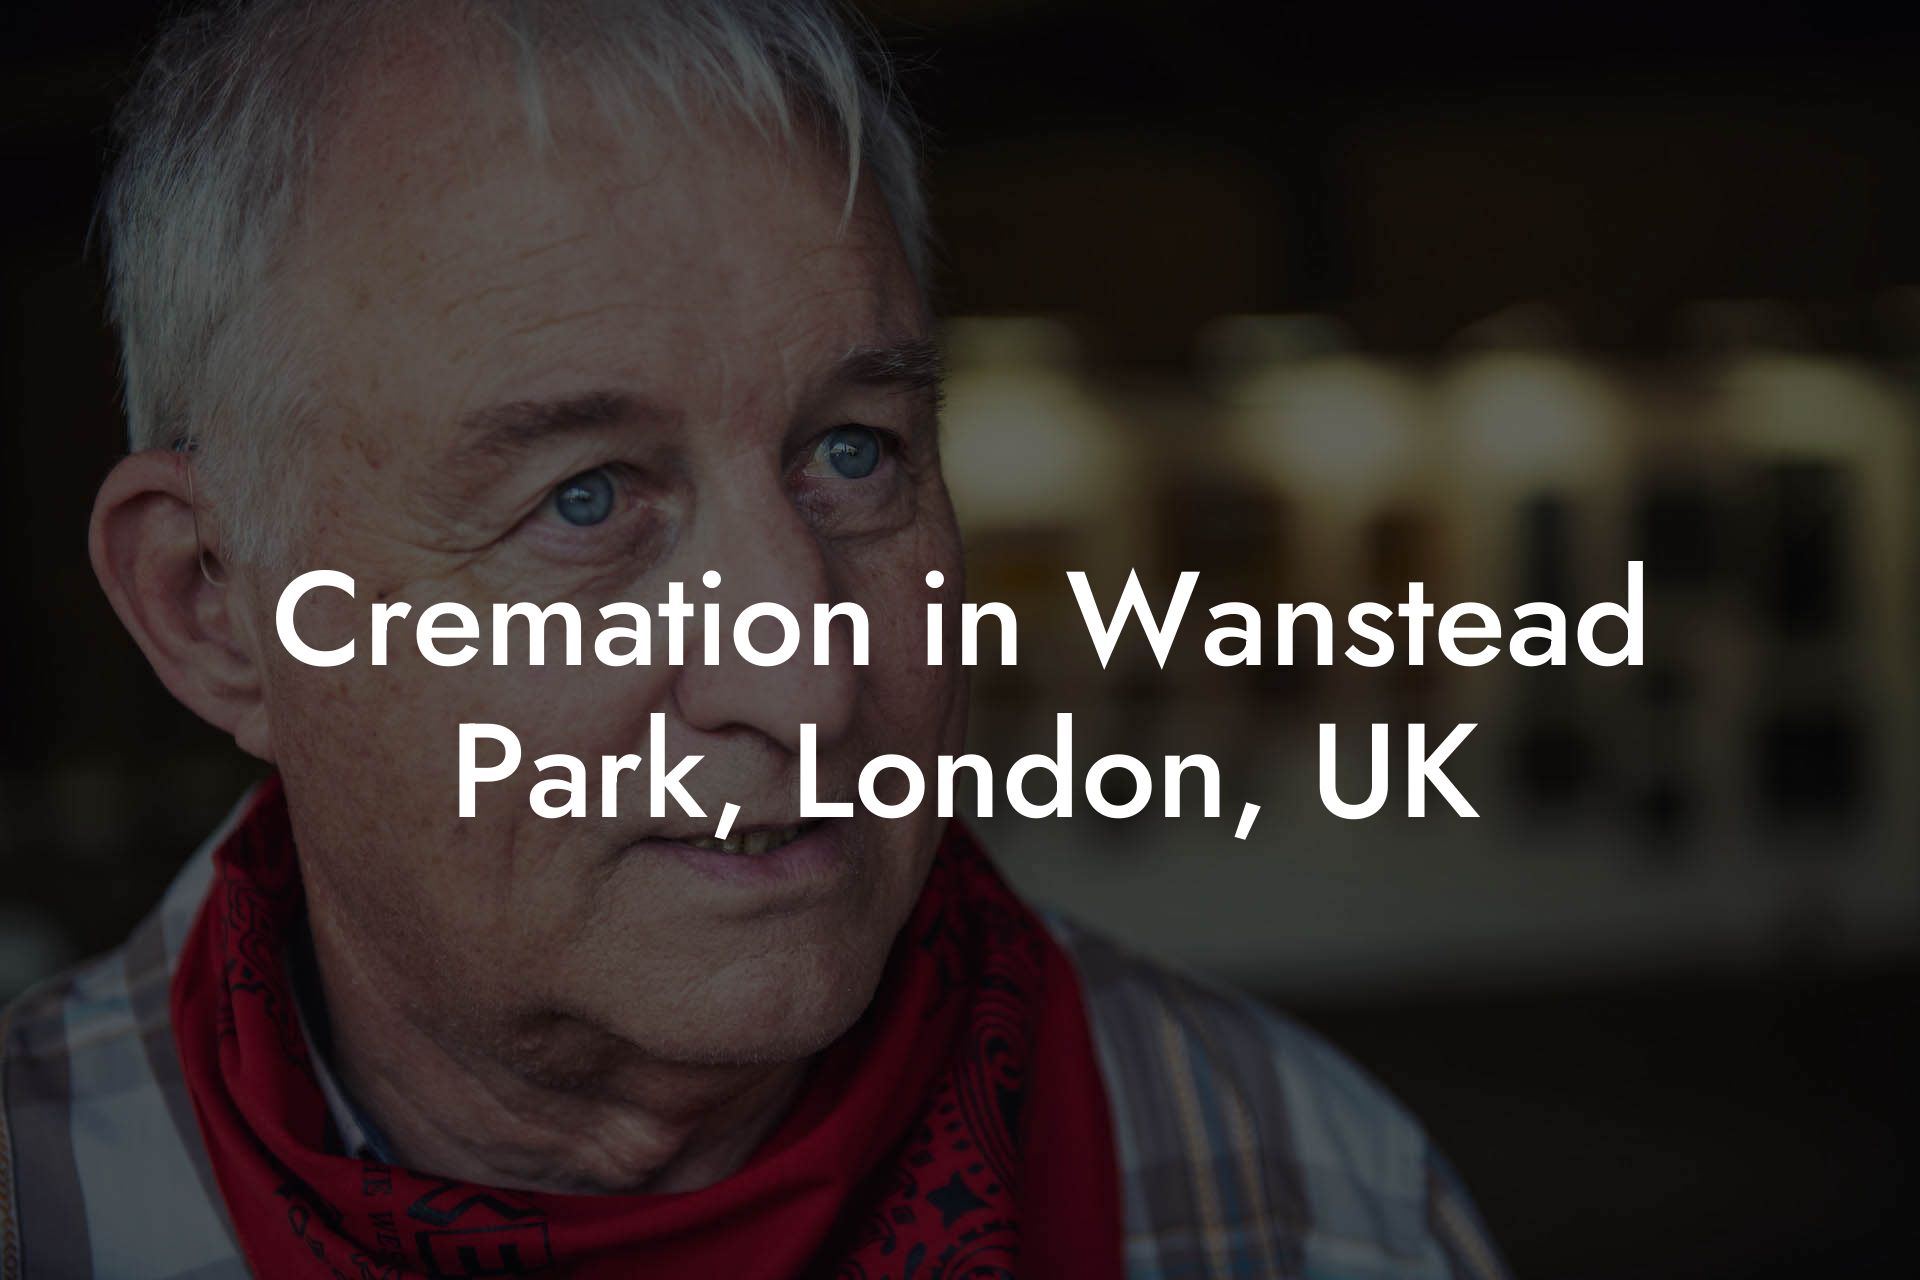 Cremation in Wanstead Park, London, UK